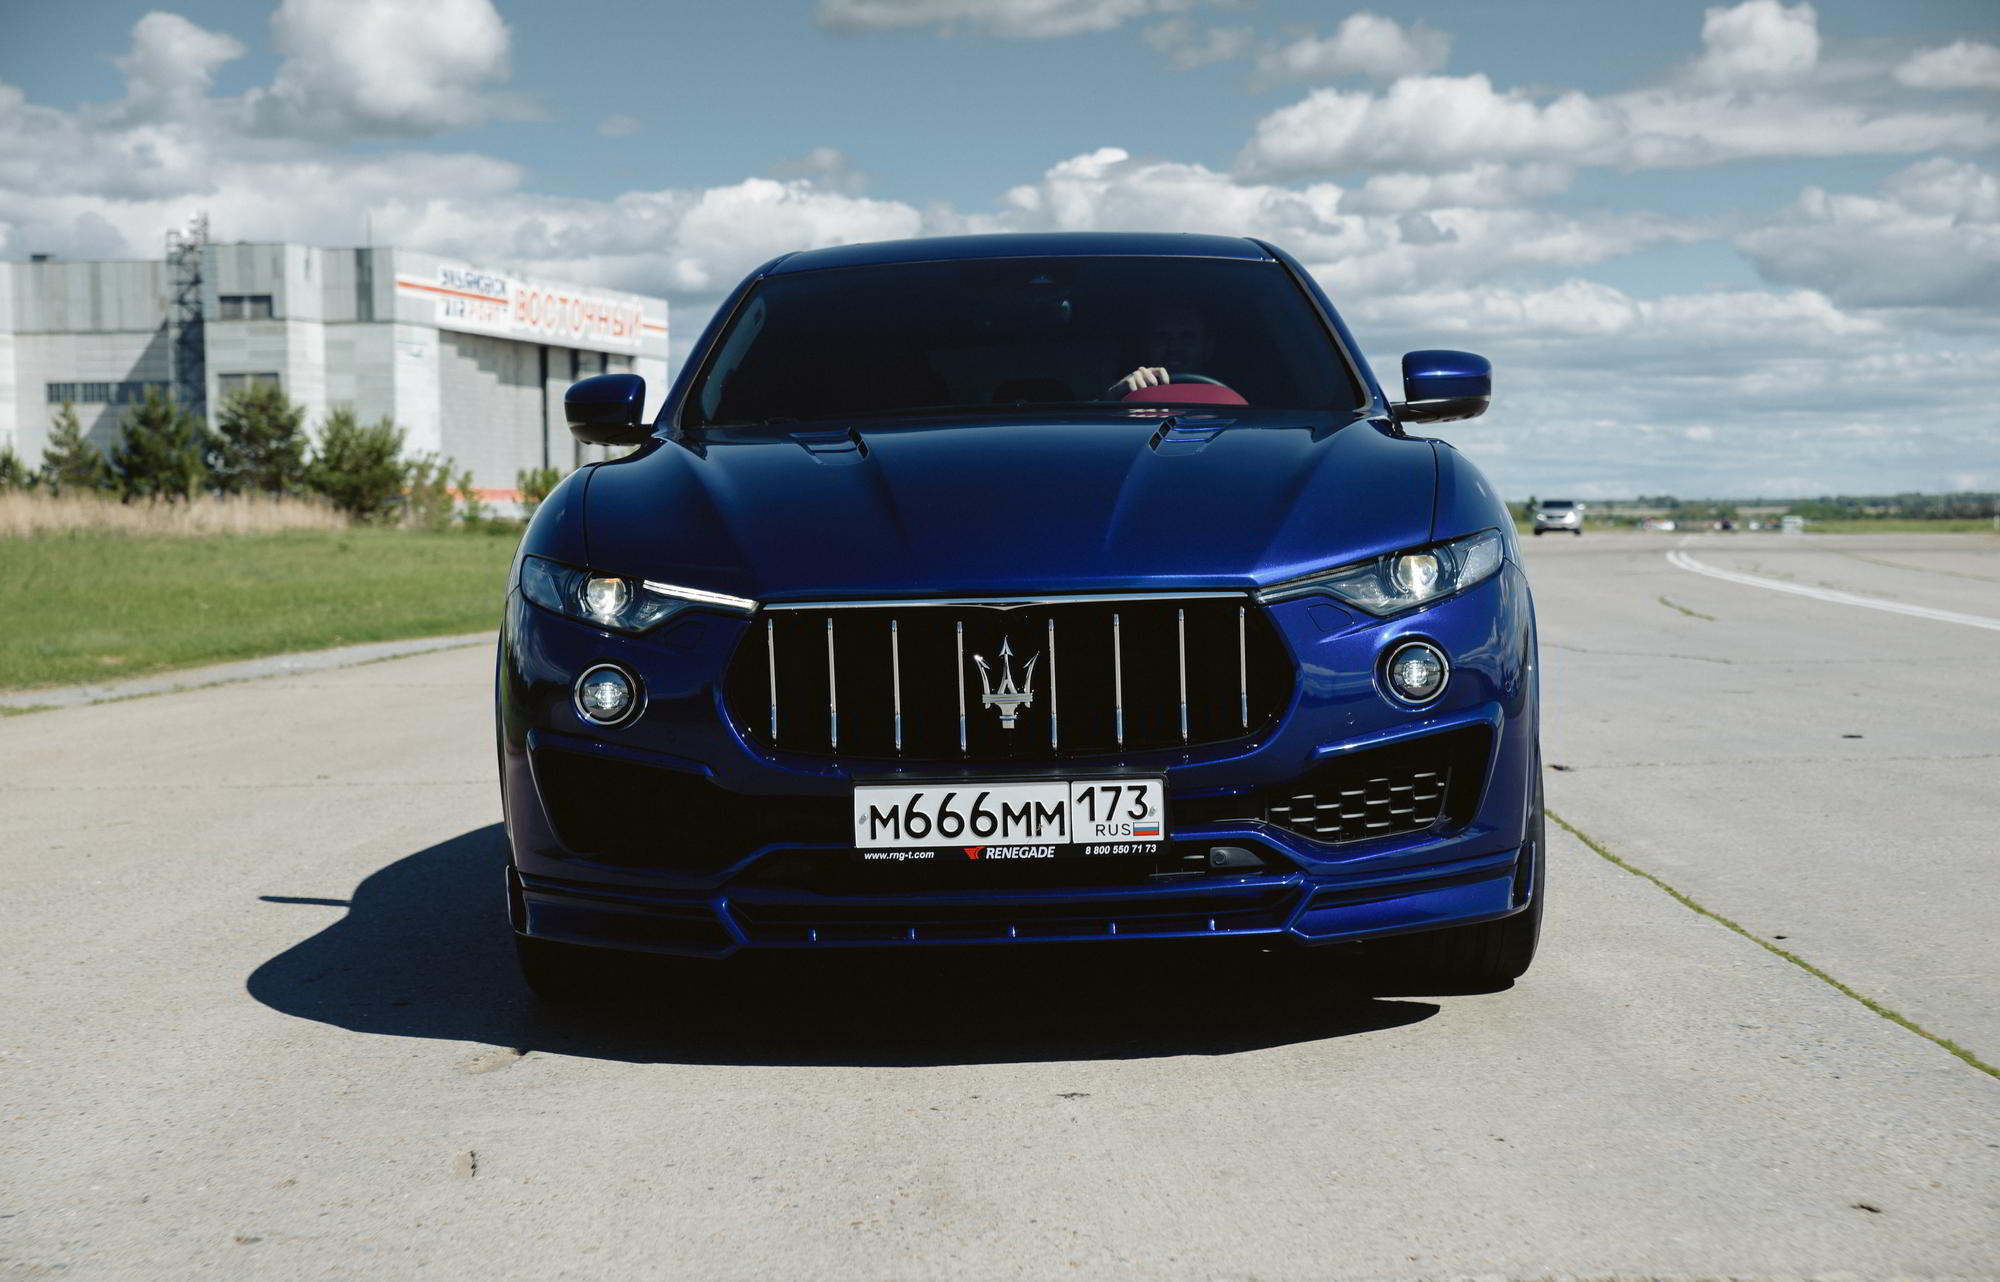 Check our price and buy Renegade Design body kit for Maserati Levante